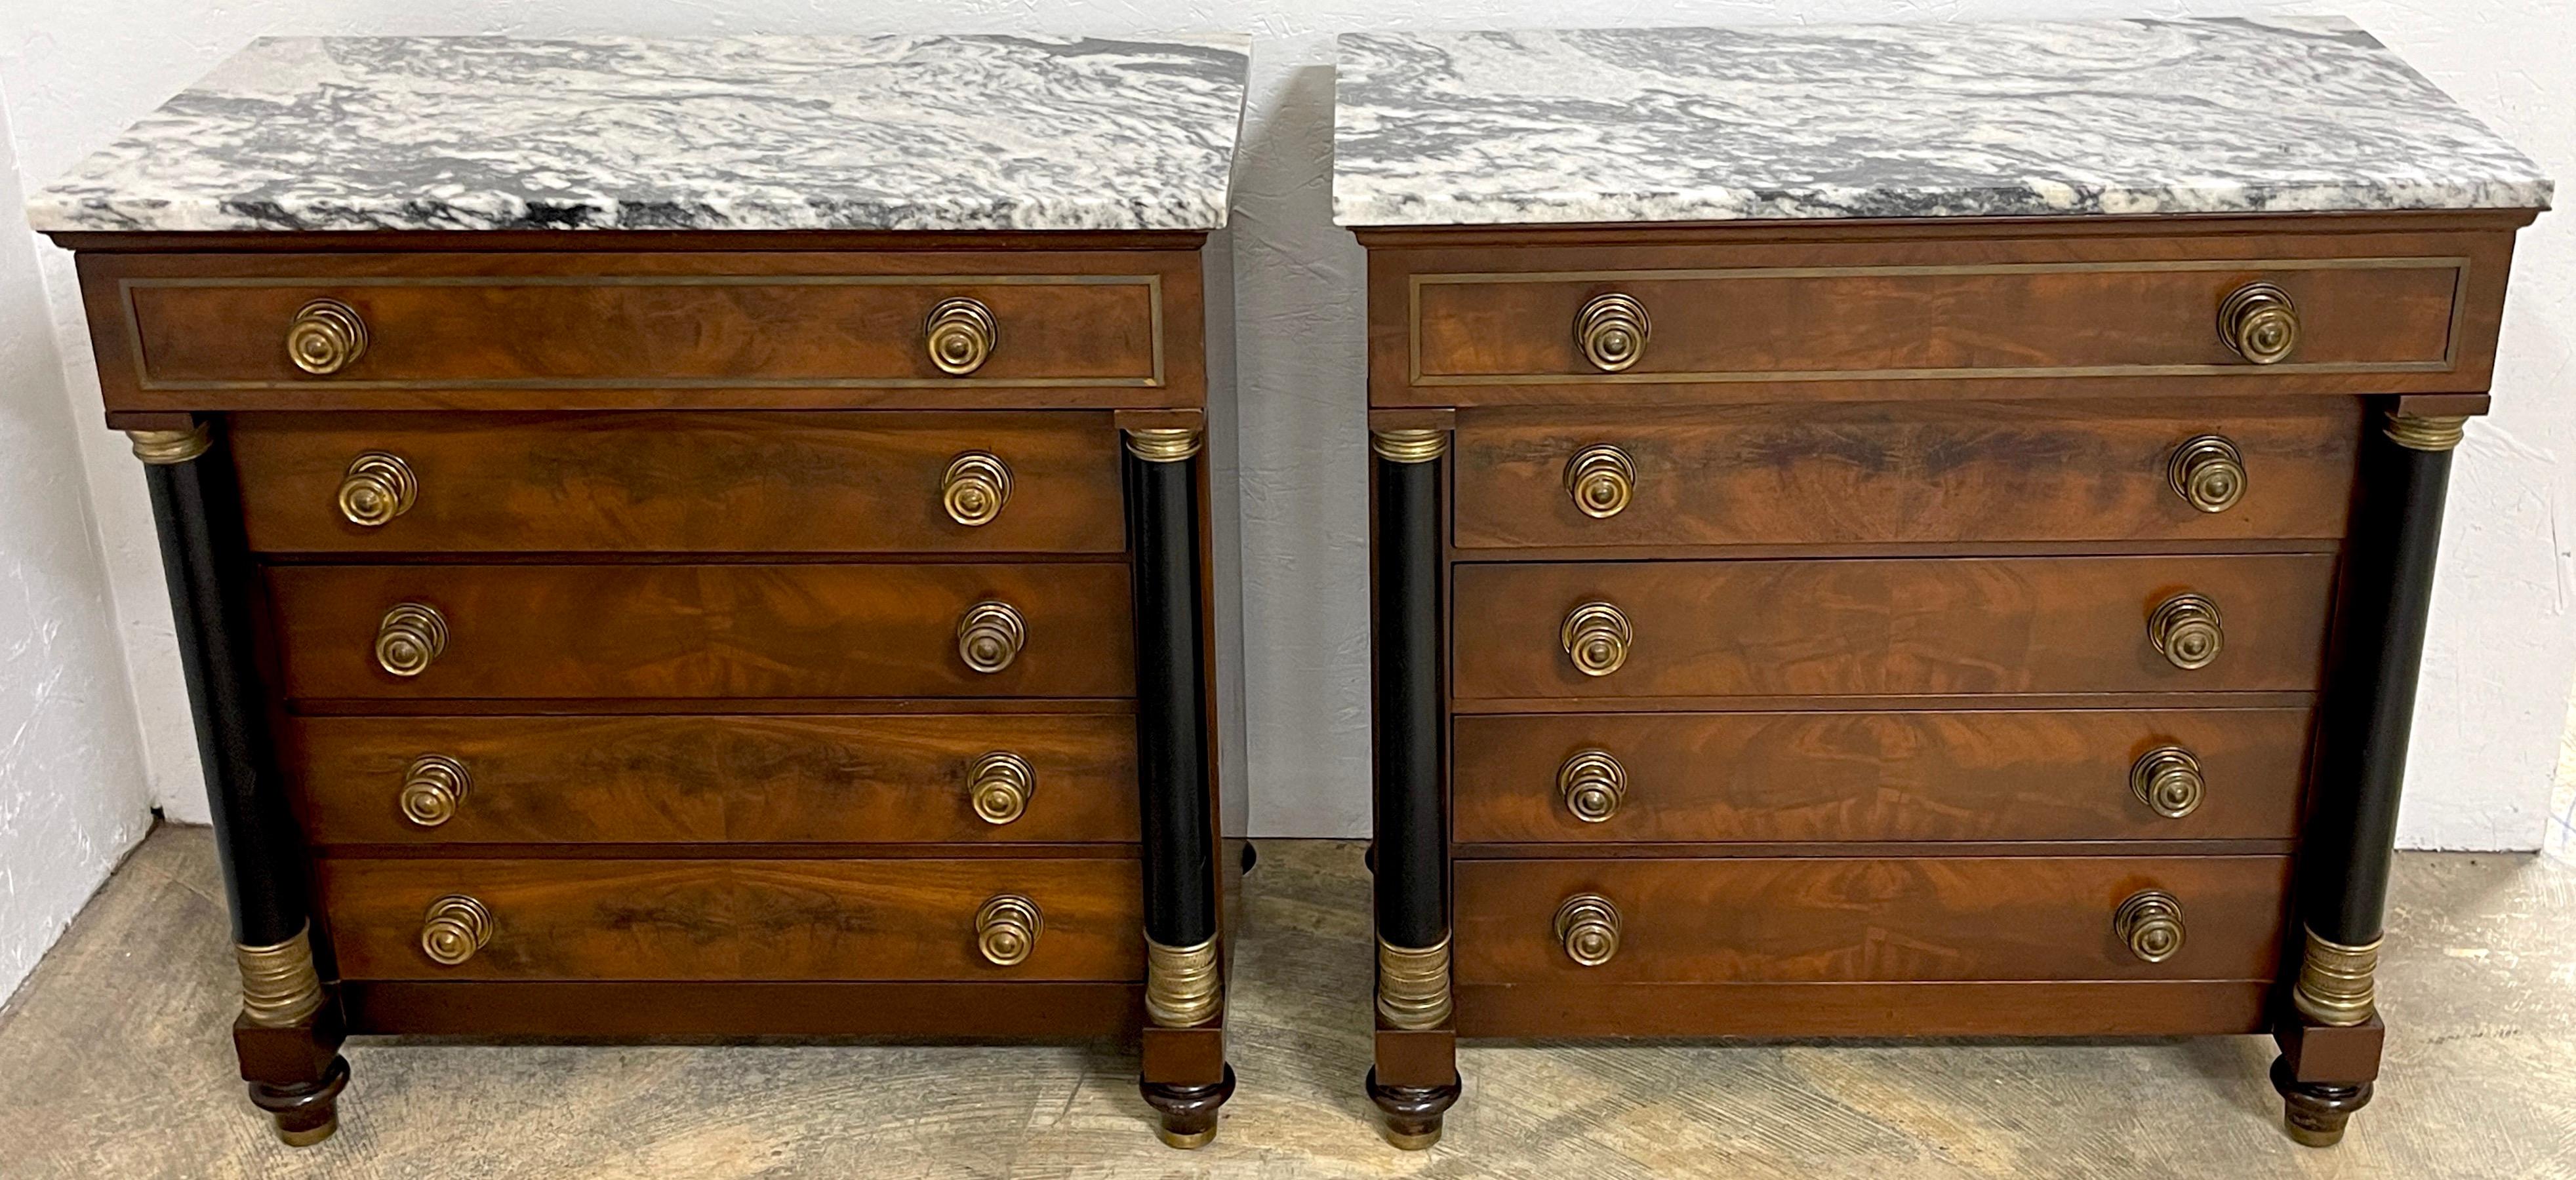 American Pair of Neoclassical Marble Top and Brass Mounted Nightstands/ Chests